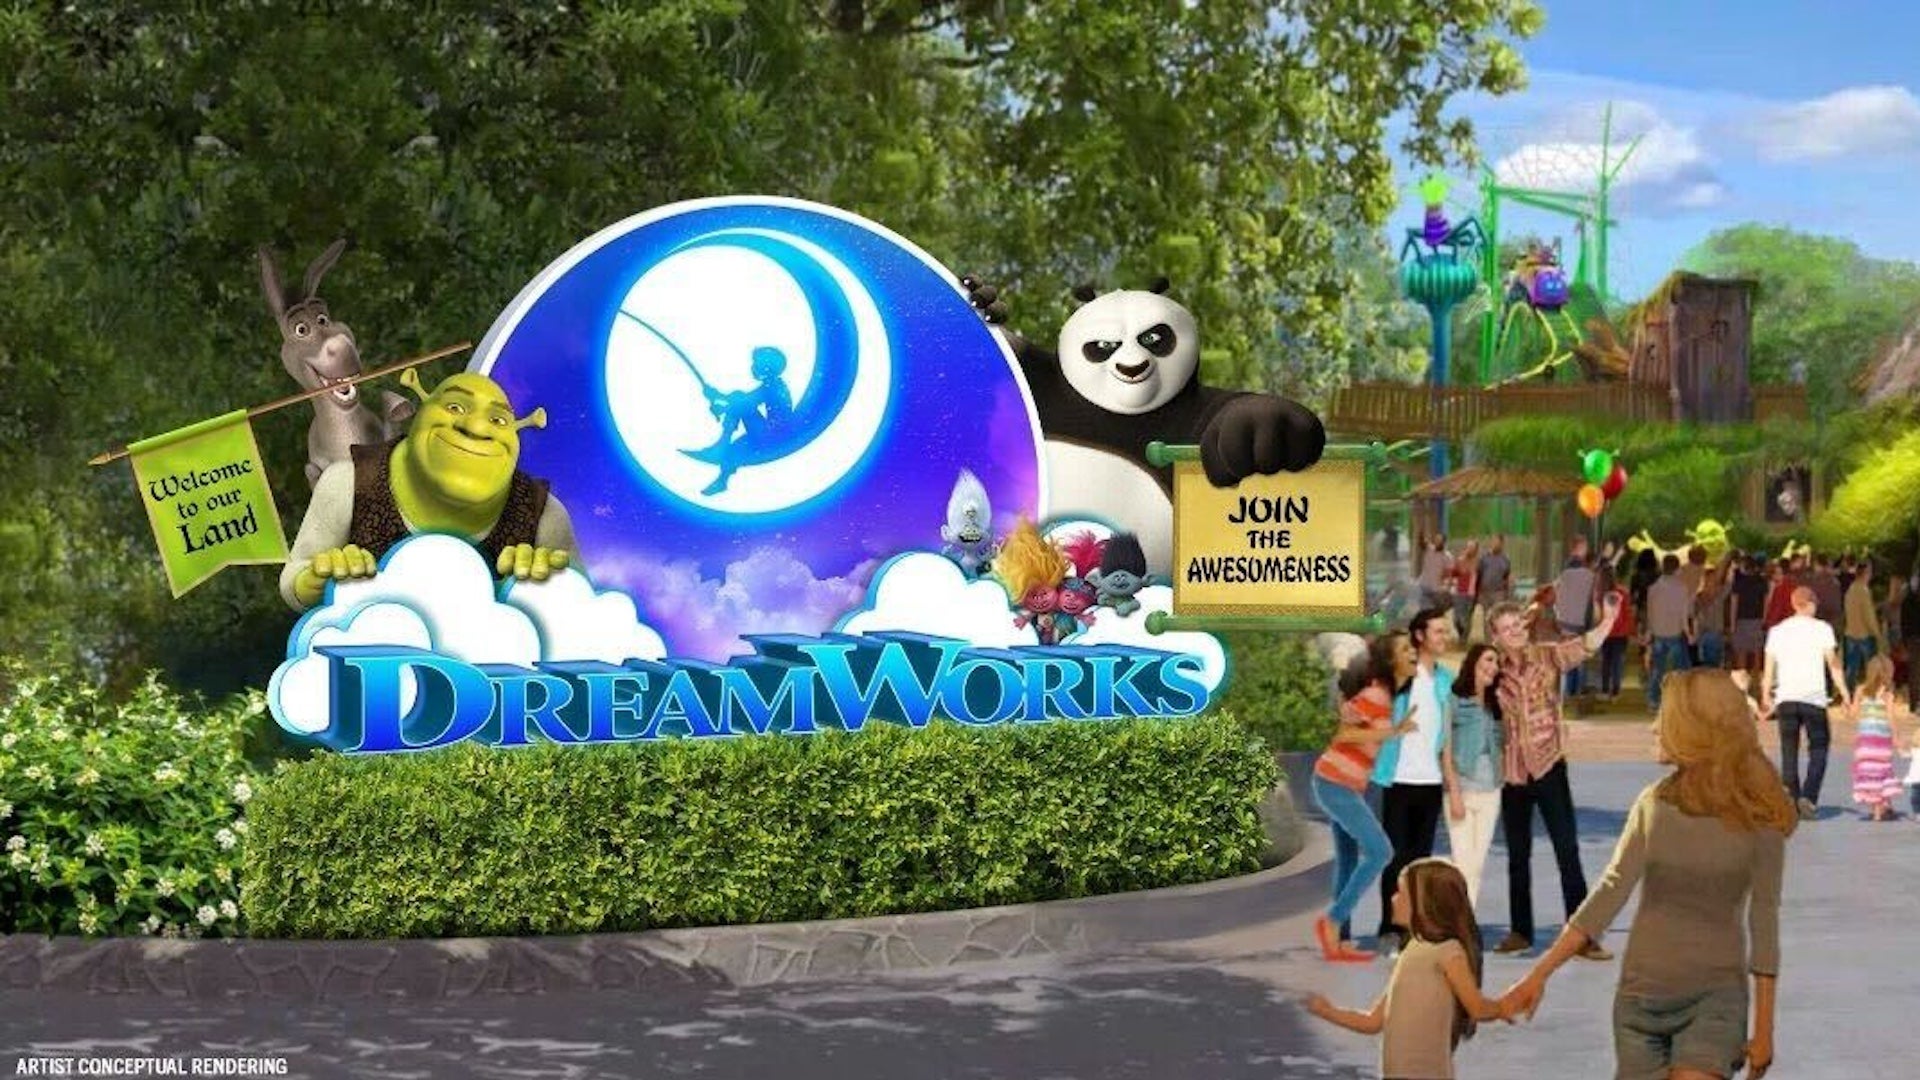 Artist rendering of the entrance to Dreamworks at Universal Orlando